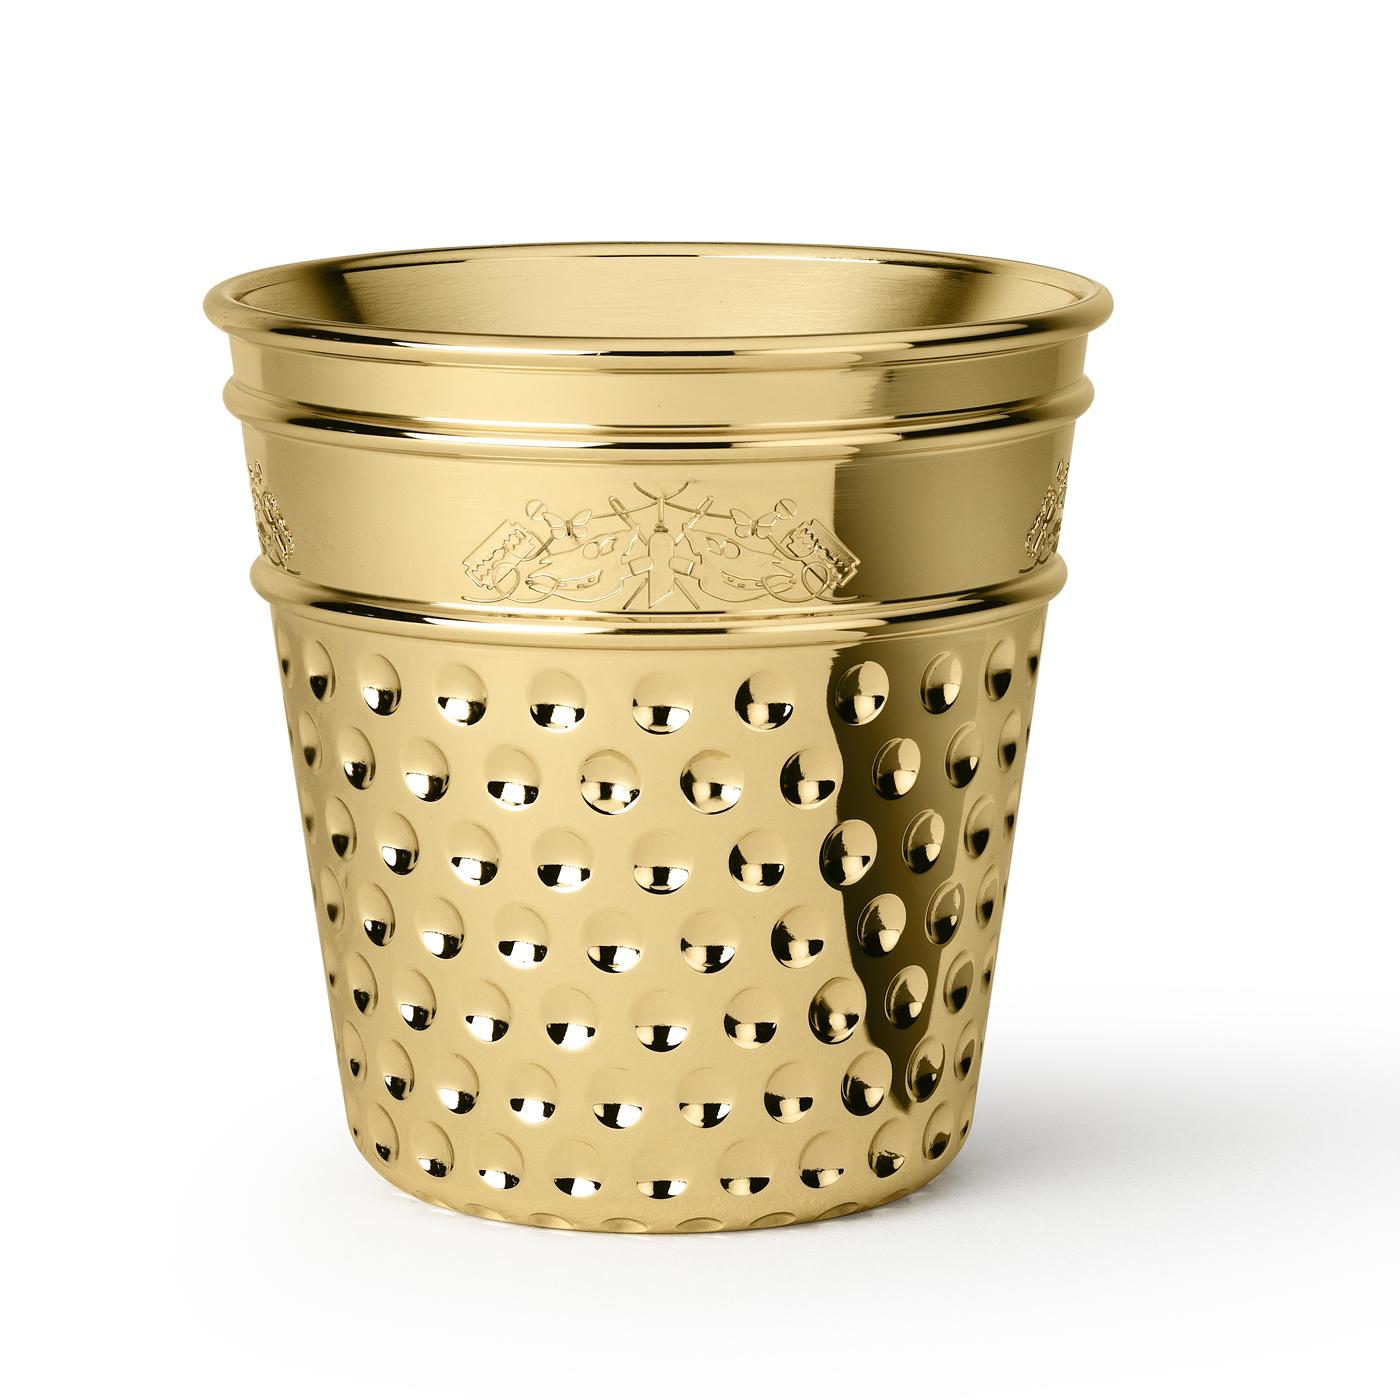 The shape of this exquisite steel ice bucket with a brass finish designed by Studio Job is that of a giant thimble and it is inspired by the family's tailoring tradition. A whimsical etching decorates the top side with butterflies and small